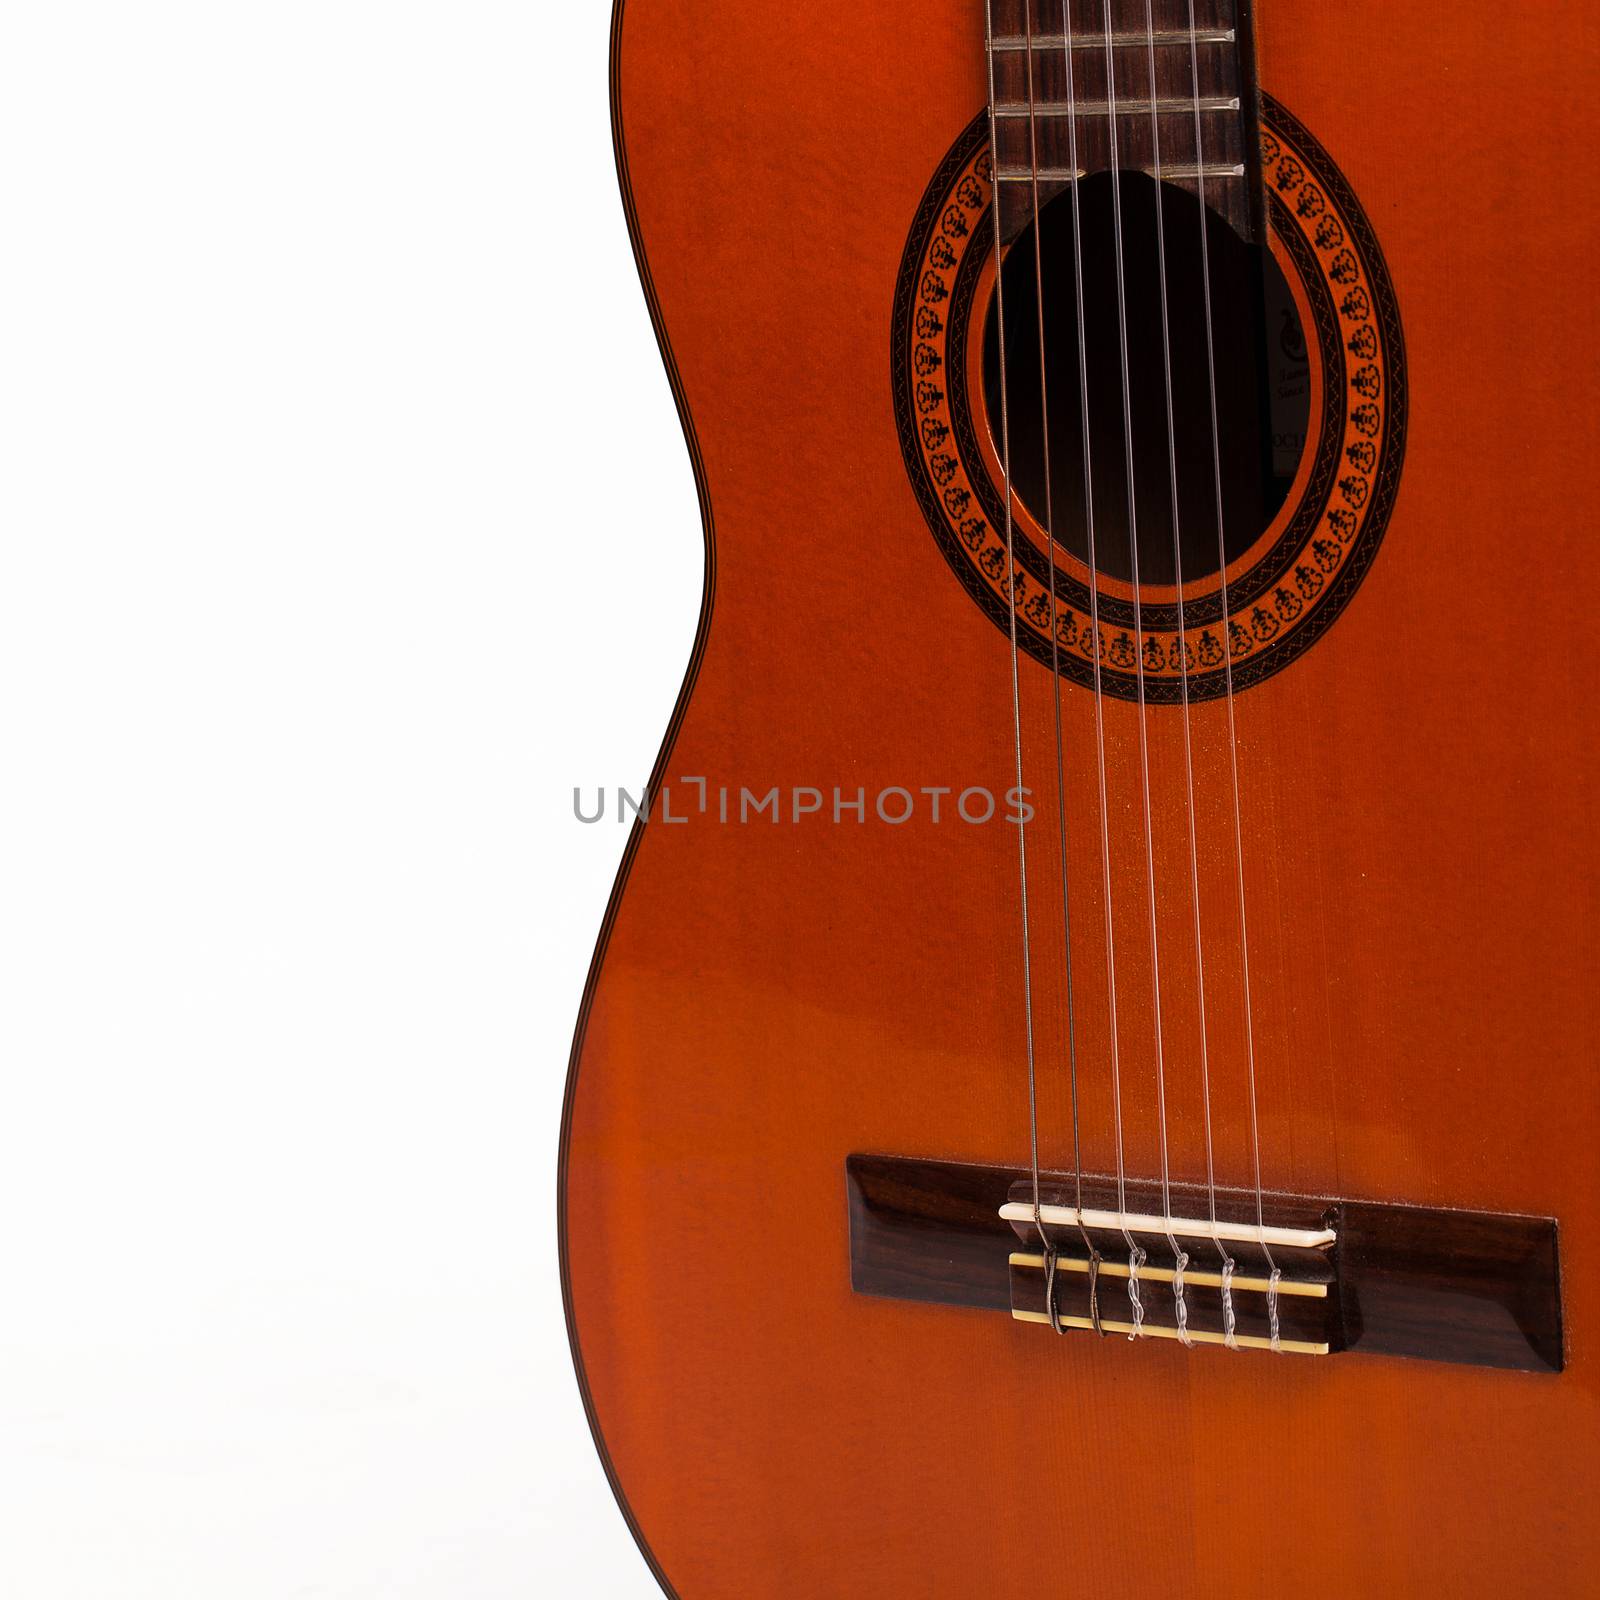 Old wooden guitar over white background by rufatjumali